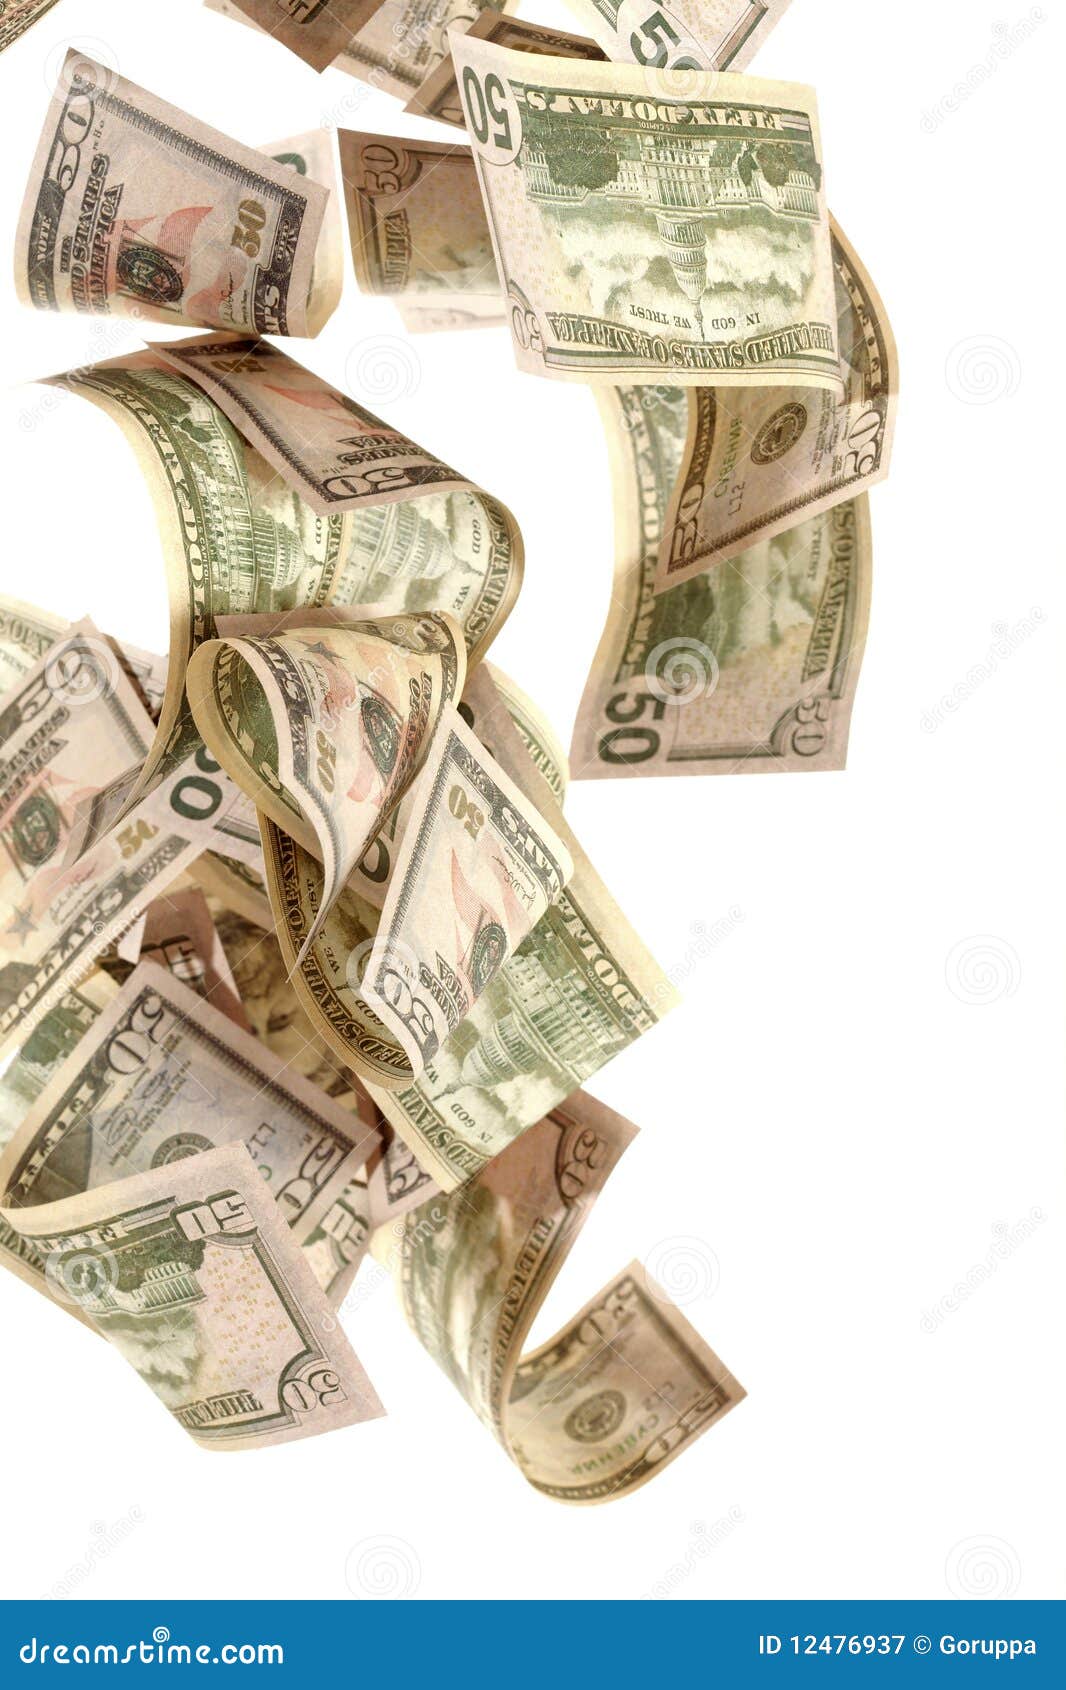 American dollars stock image. Image of business, luck - 12476937